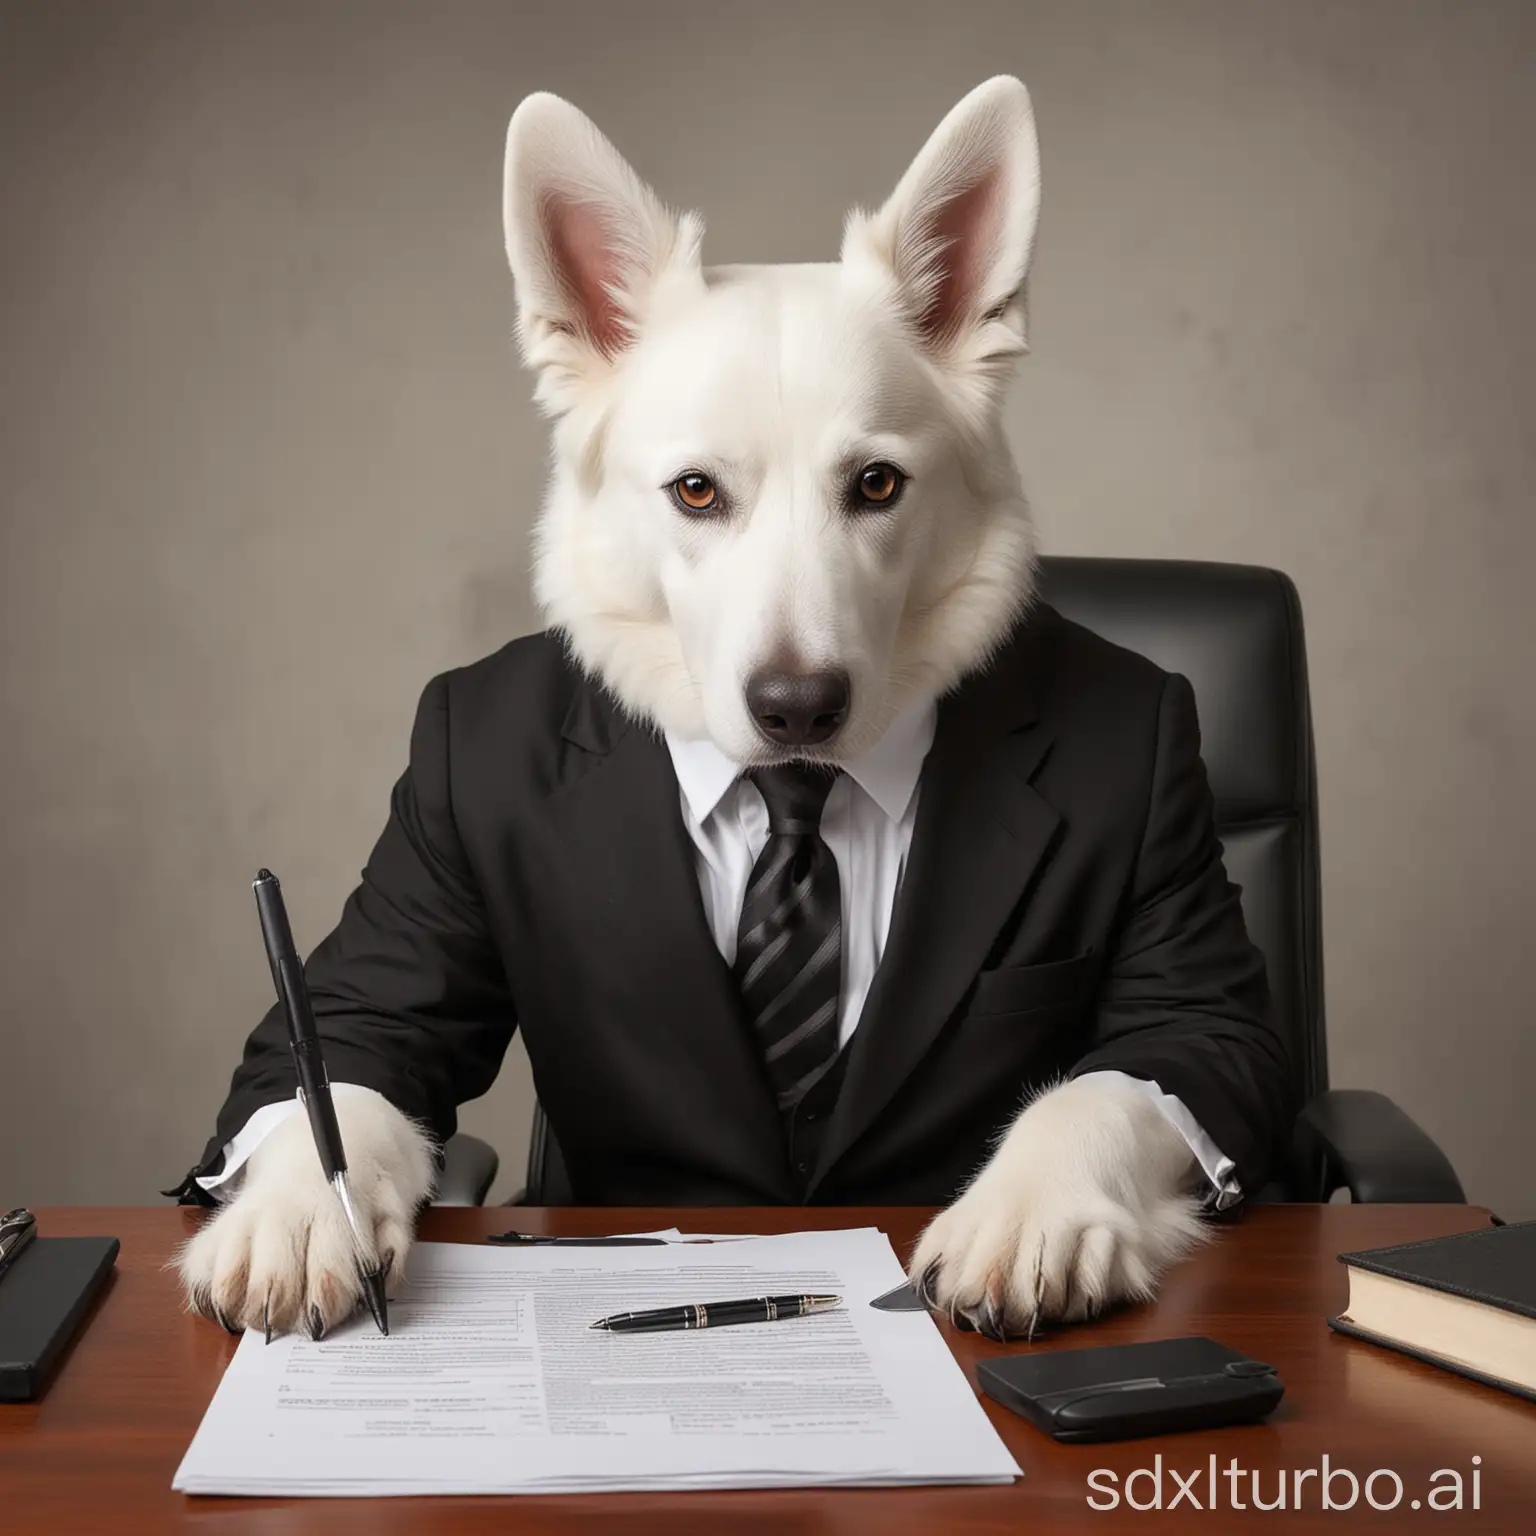 a white Swiss shepherd dog as director with a suit and tie at the desk signing documents